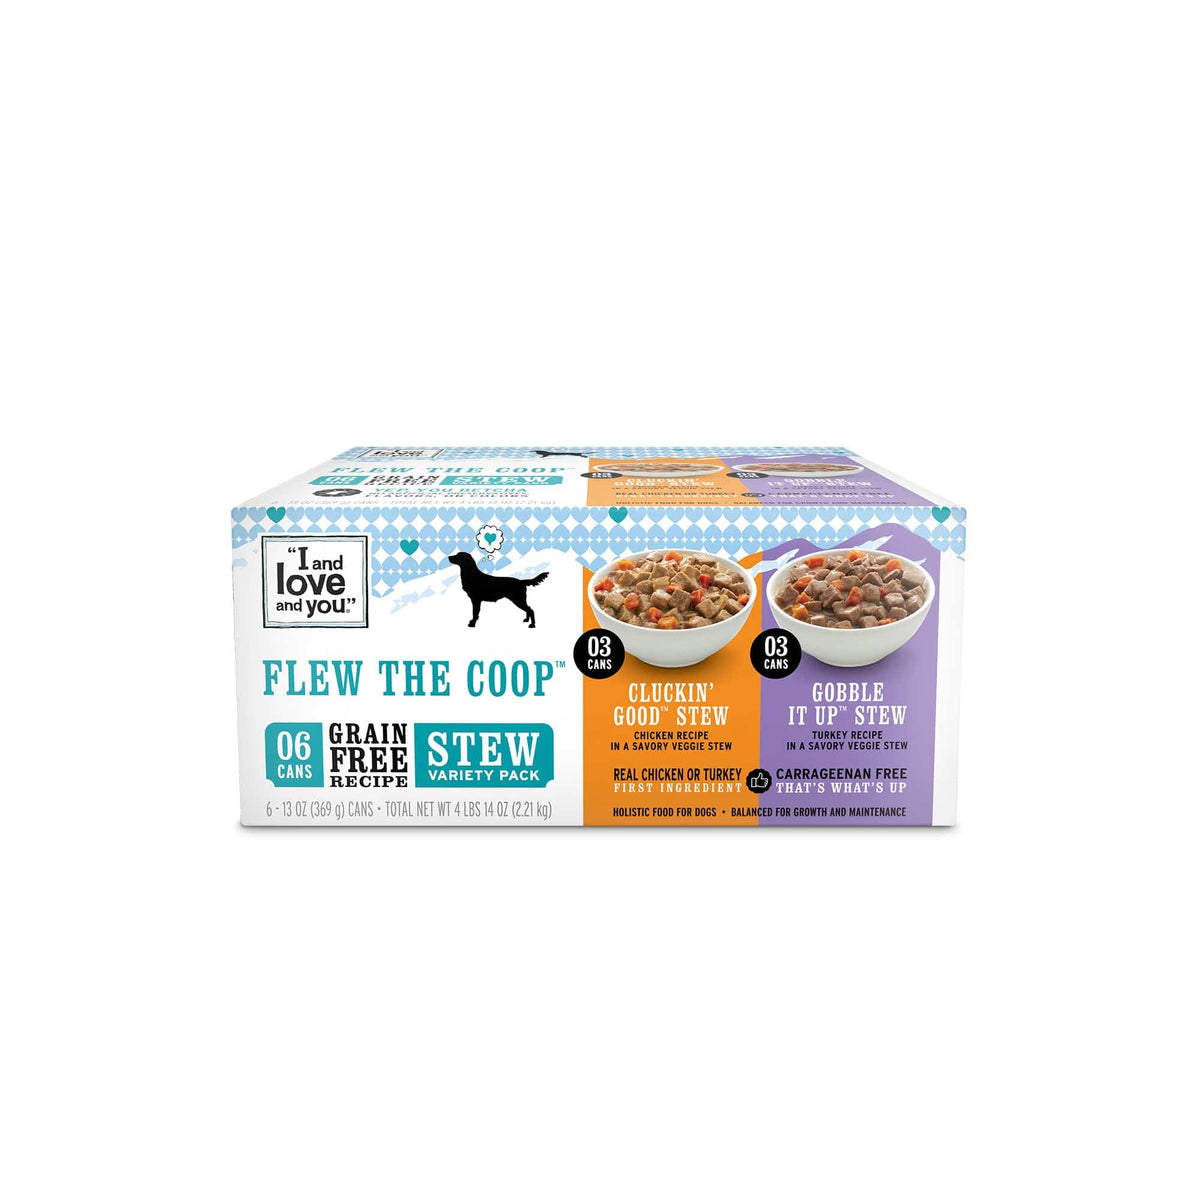 Dog Can Variety-Pack - Flew The Coop: A box of dog food with bowls of savory, poultry-packed wet meals for your pup.